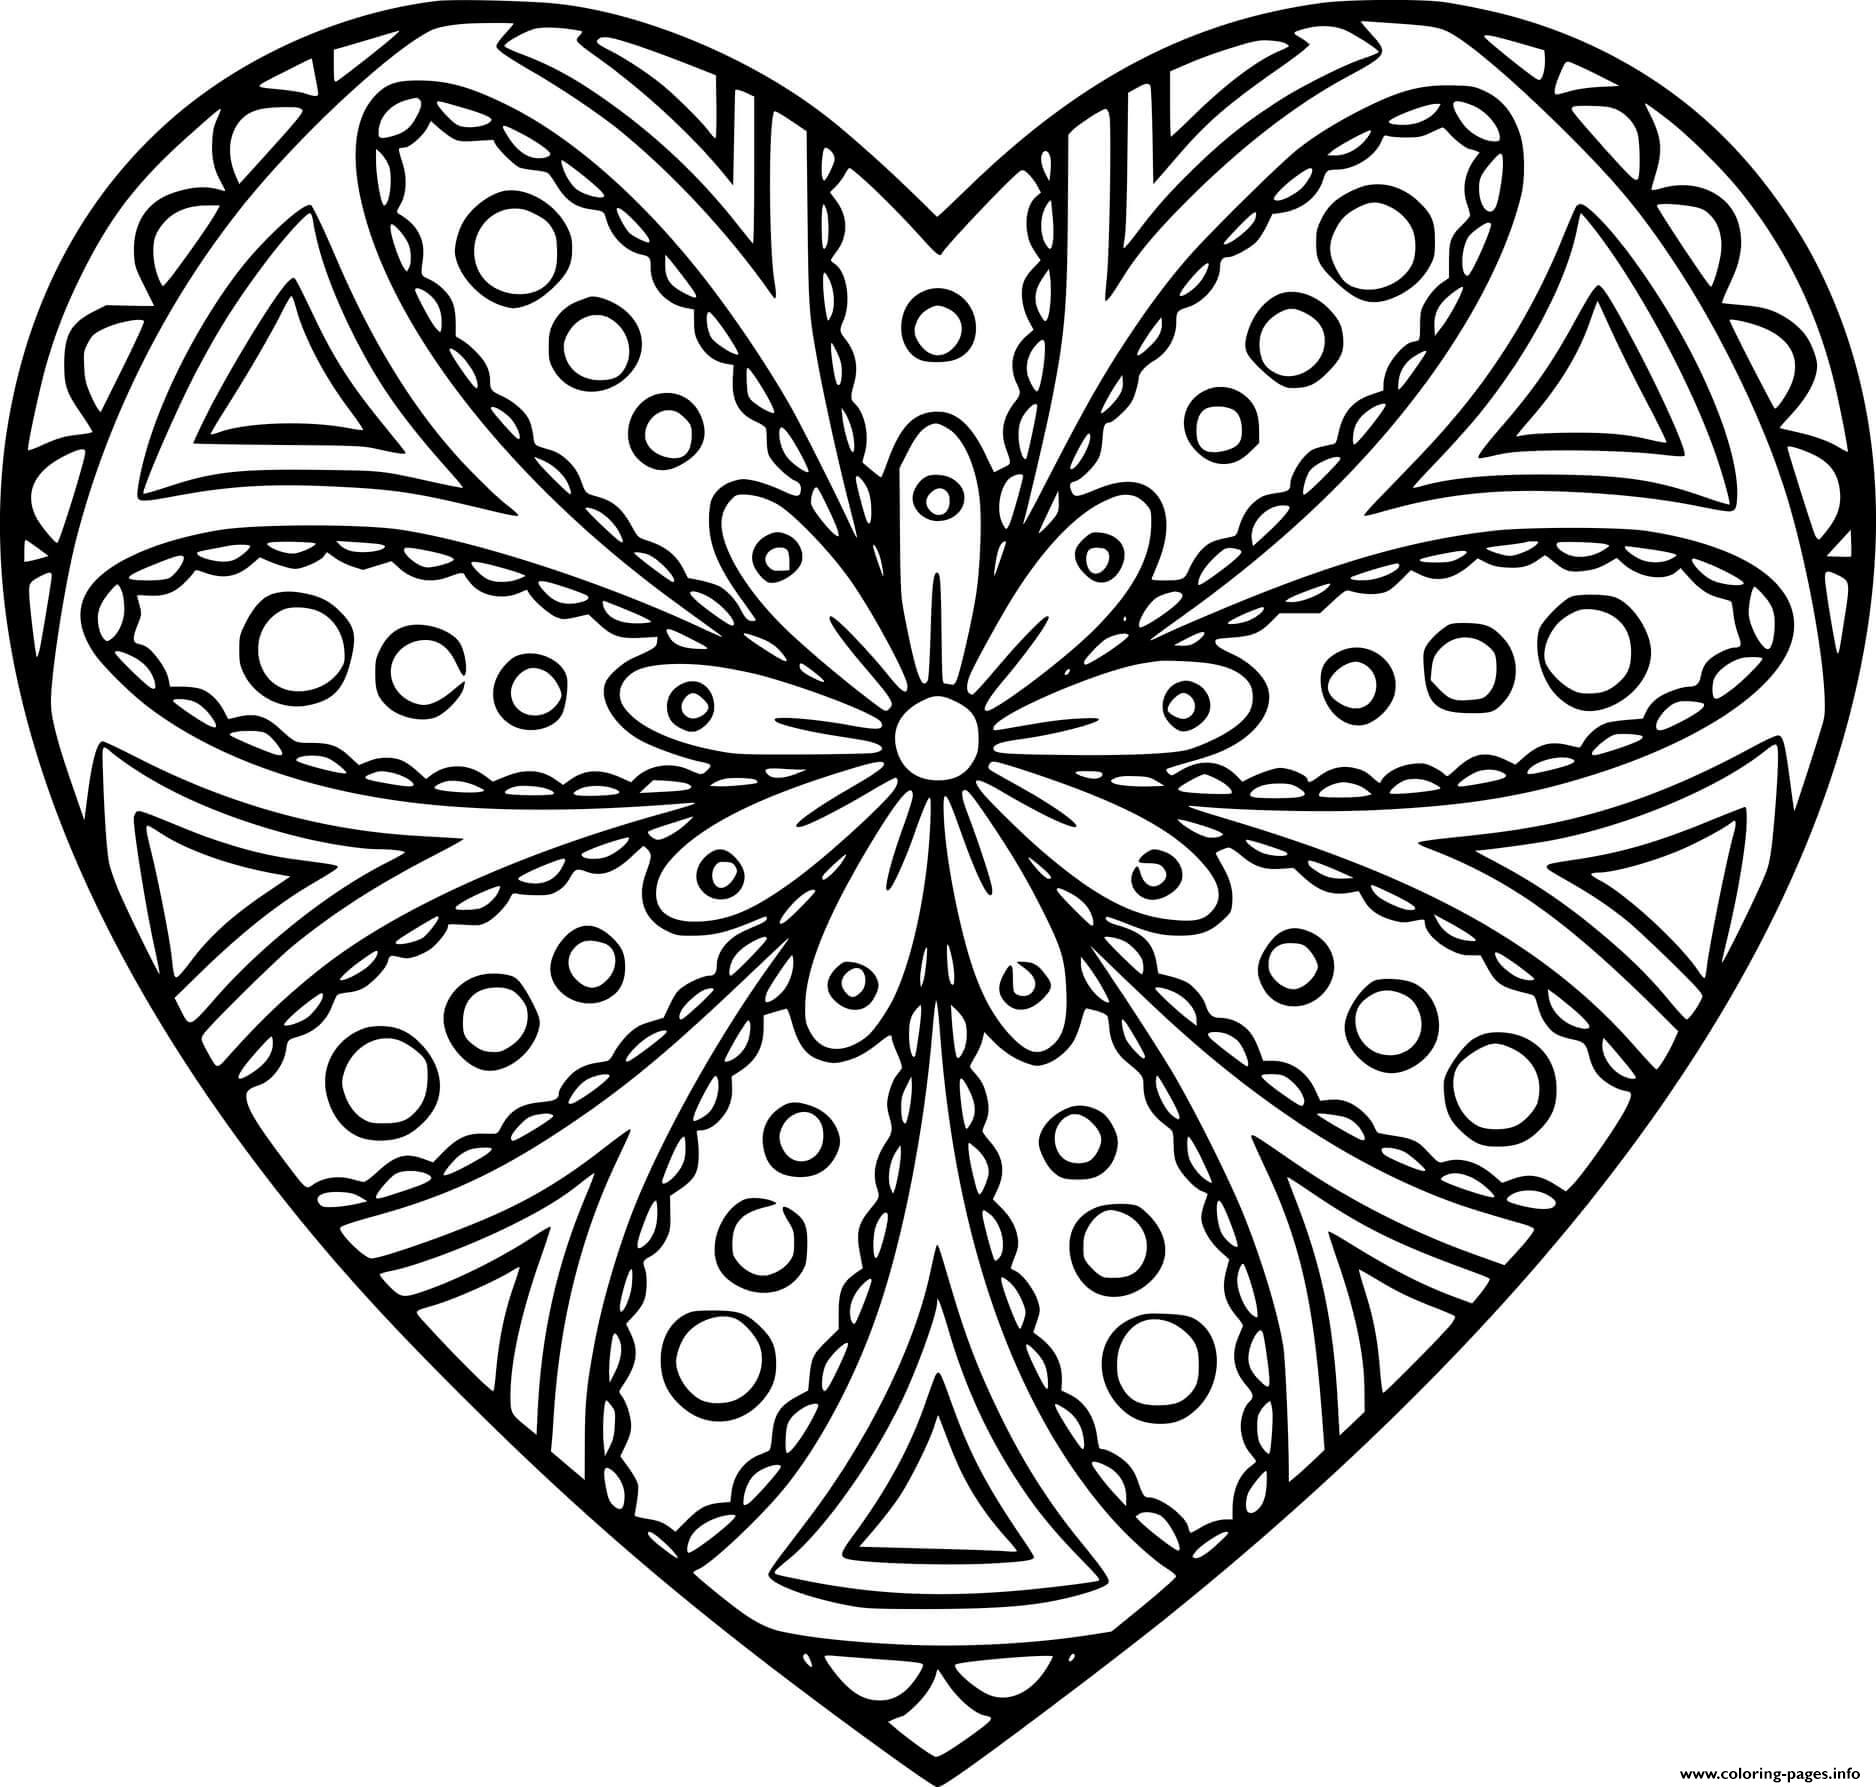 Heart With Symmetrical Patterns coloring